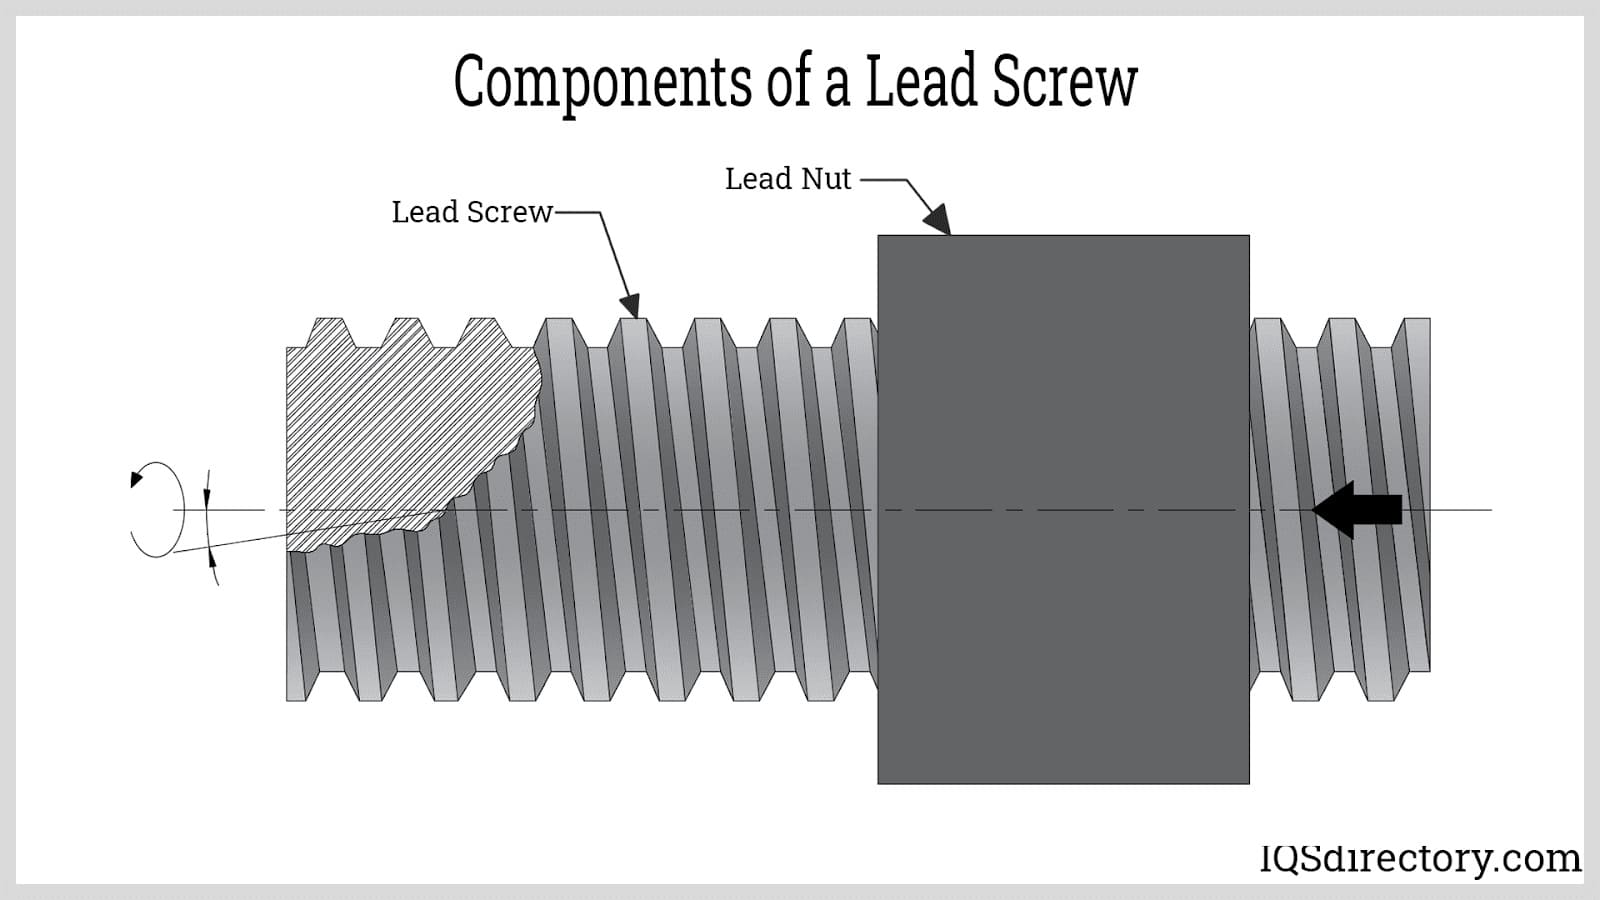 Components of a Lead Screw